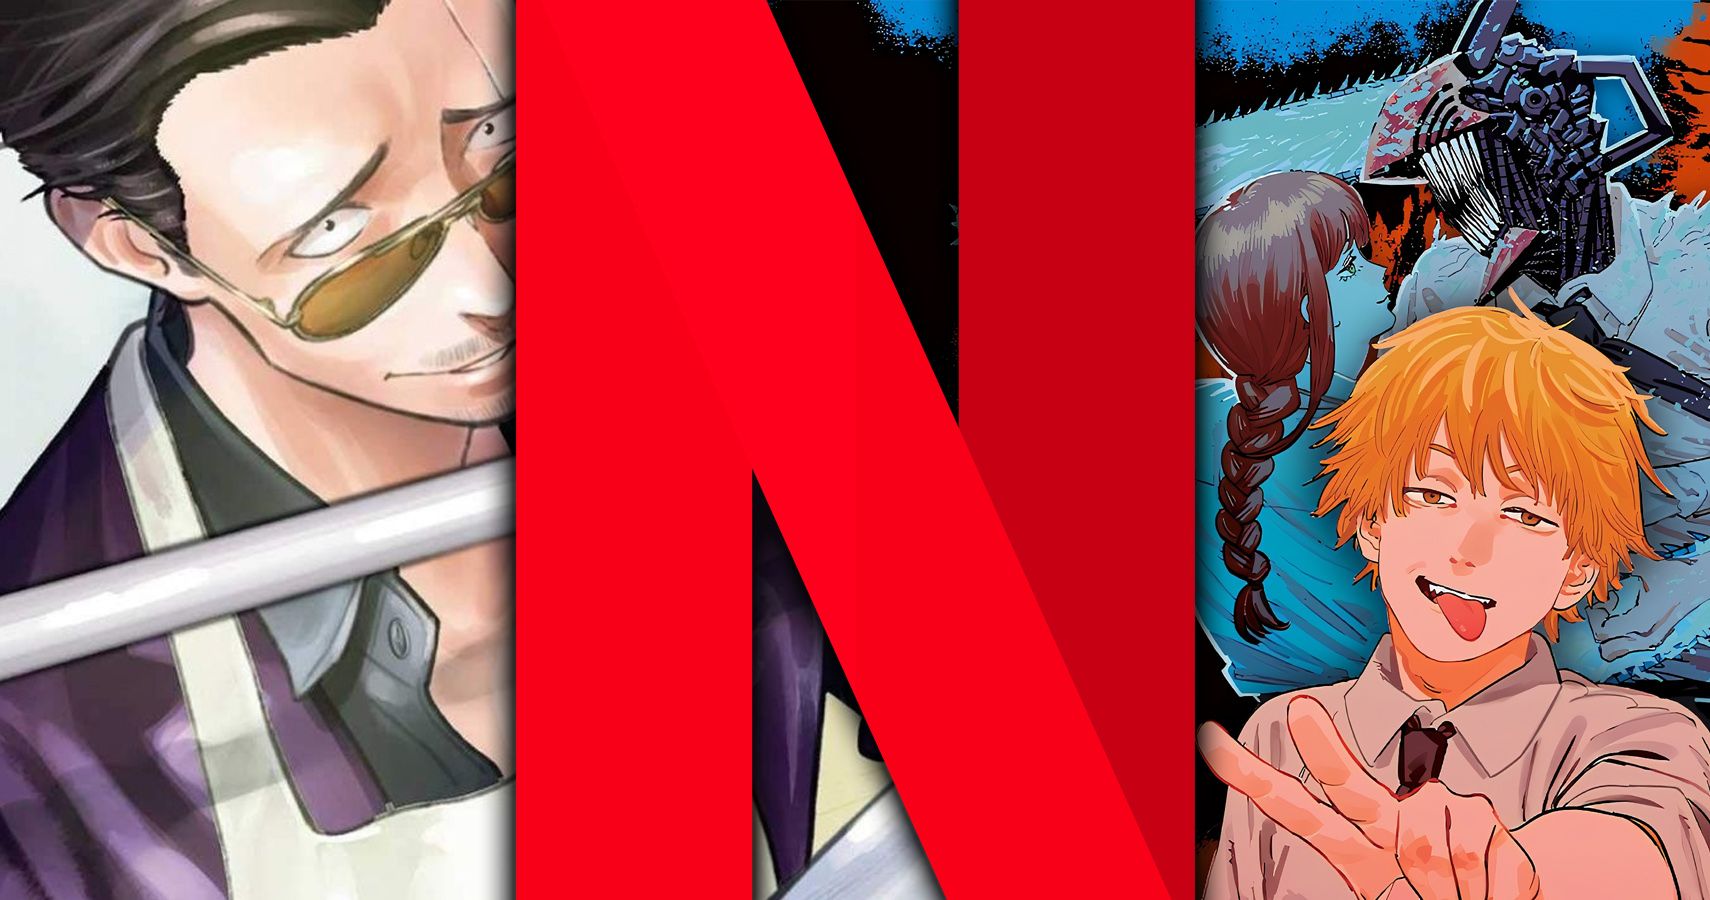 Anime Coming to Netflix in 2021 